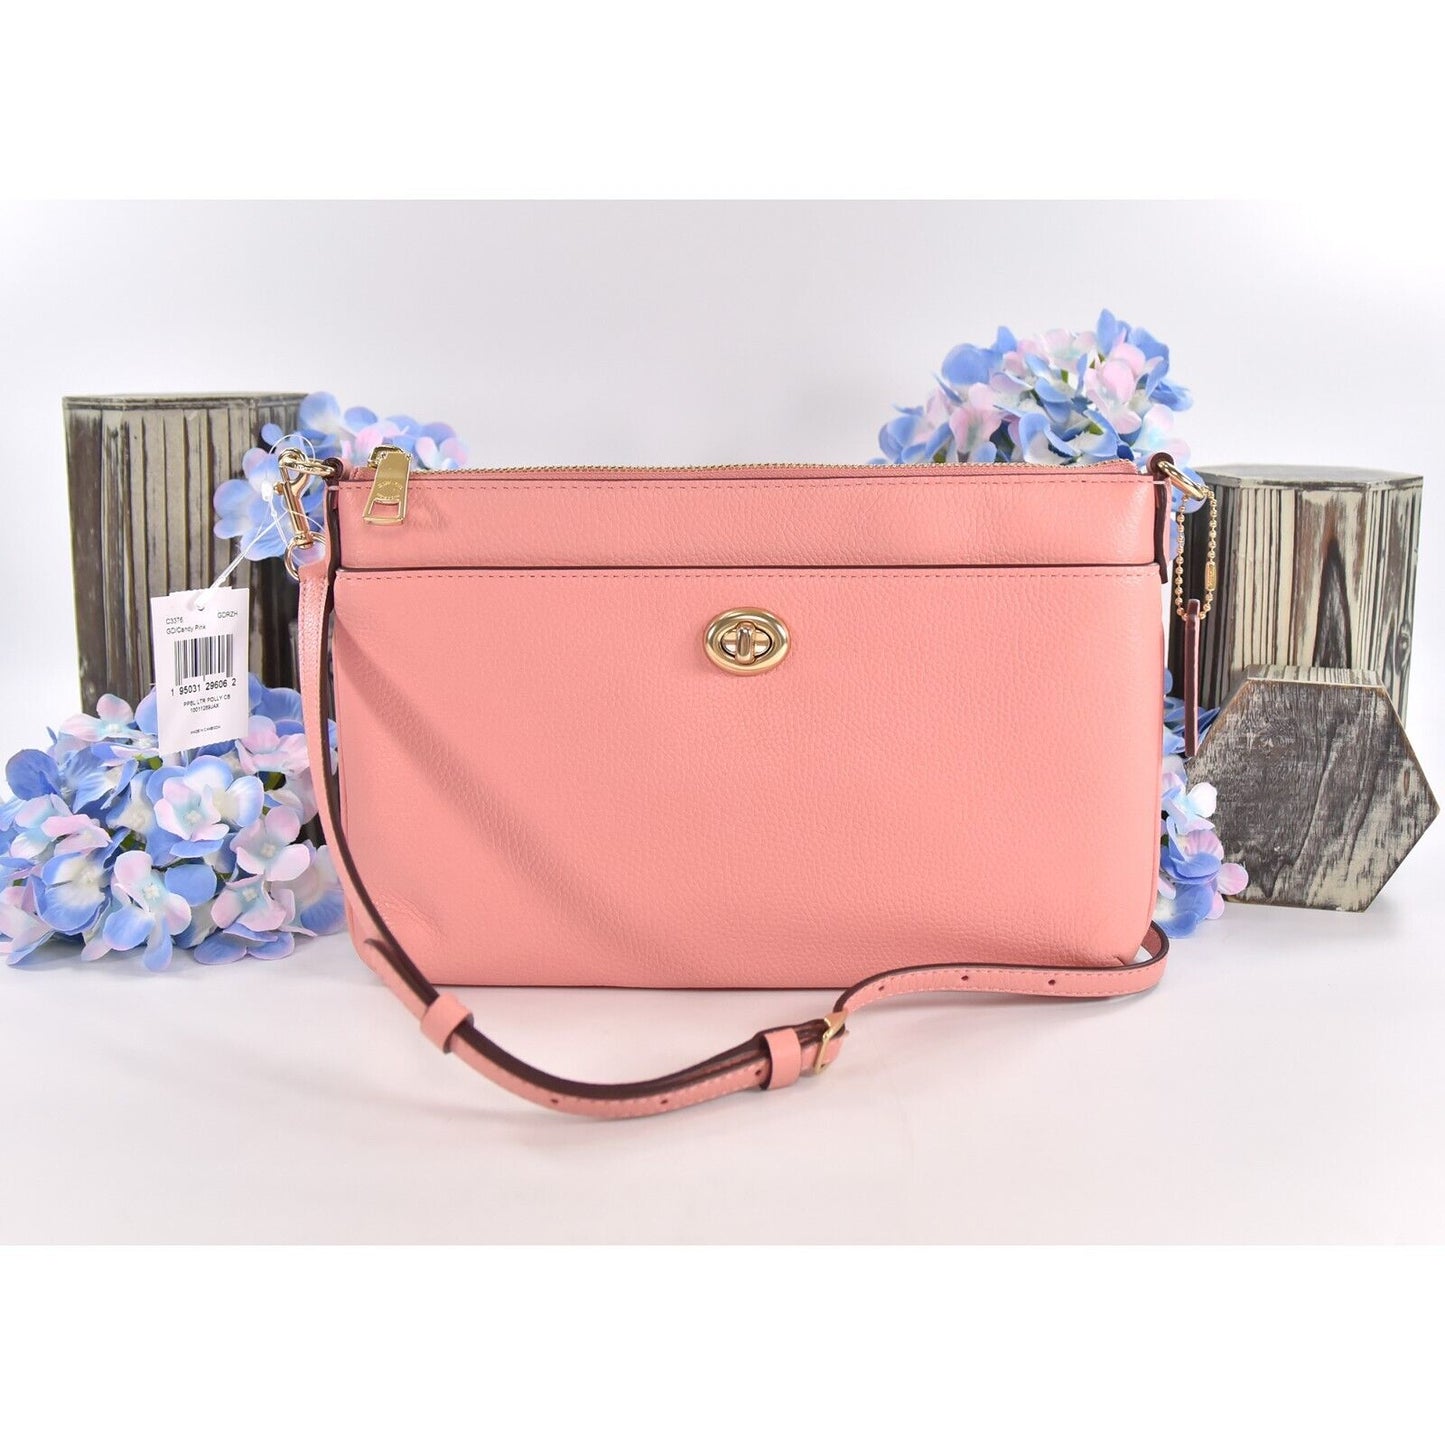 Coach Polly Candy Pink Pebbled Leather Turnlock Slim Crossbody Bag NWT